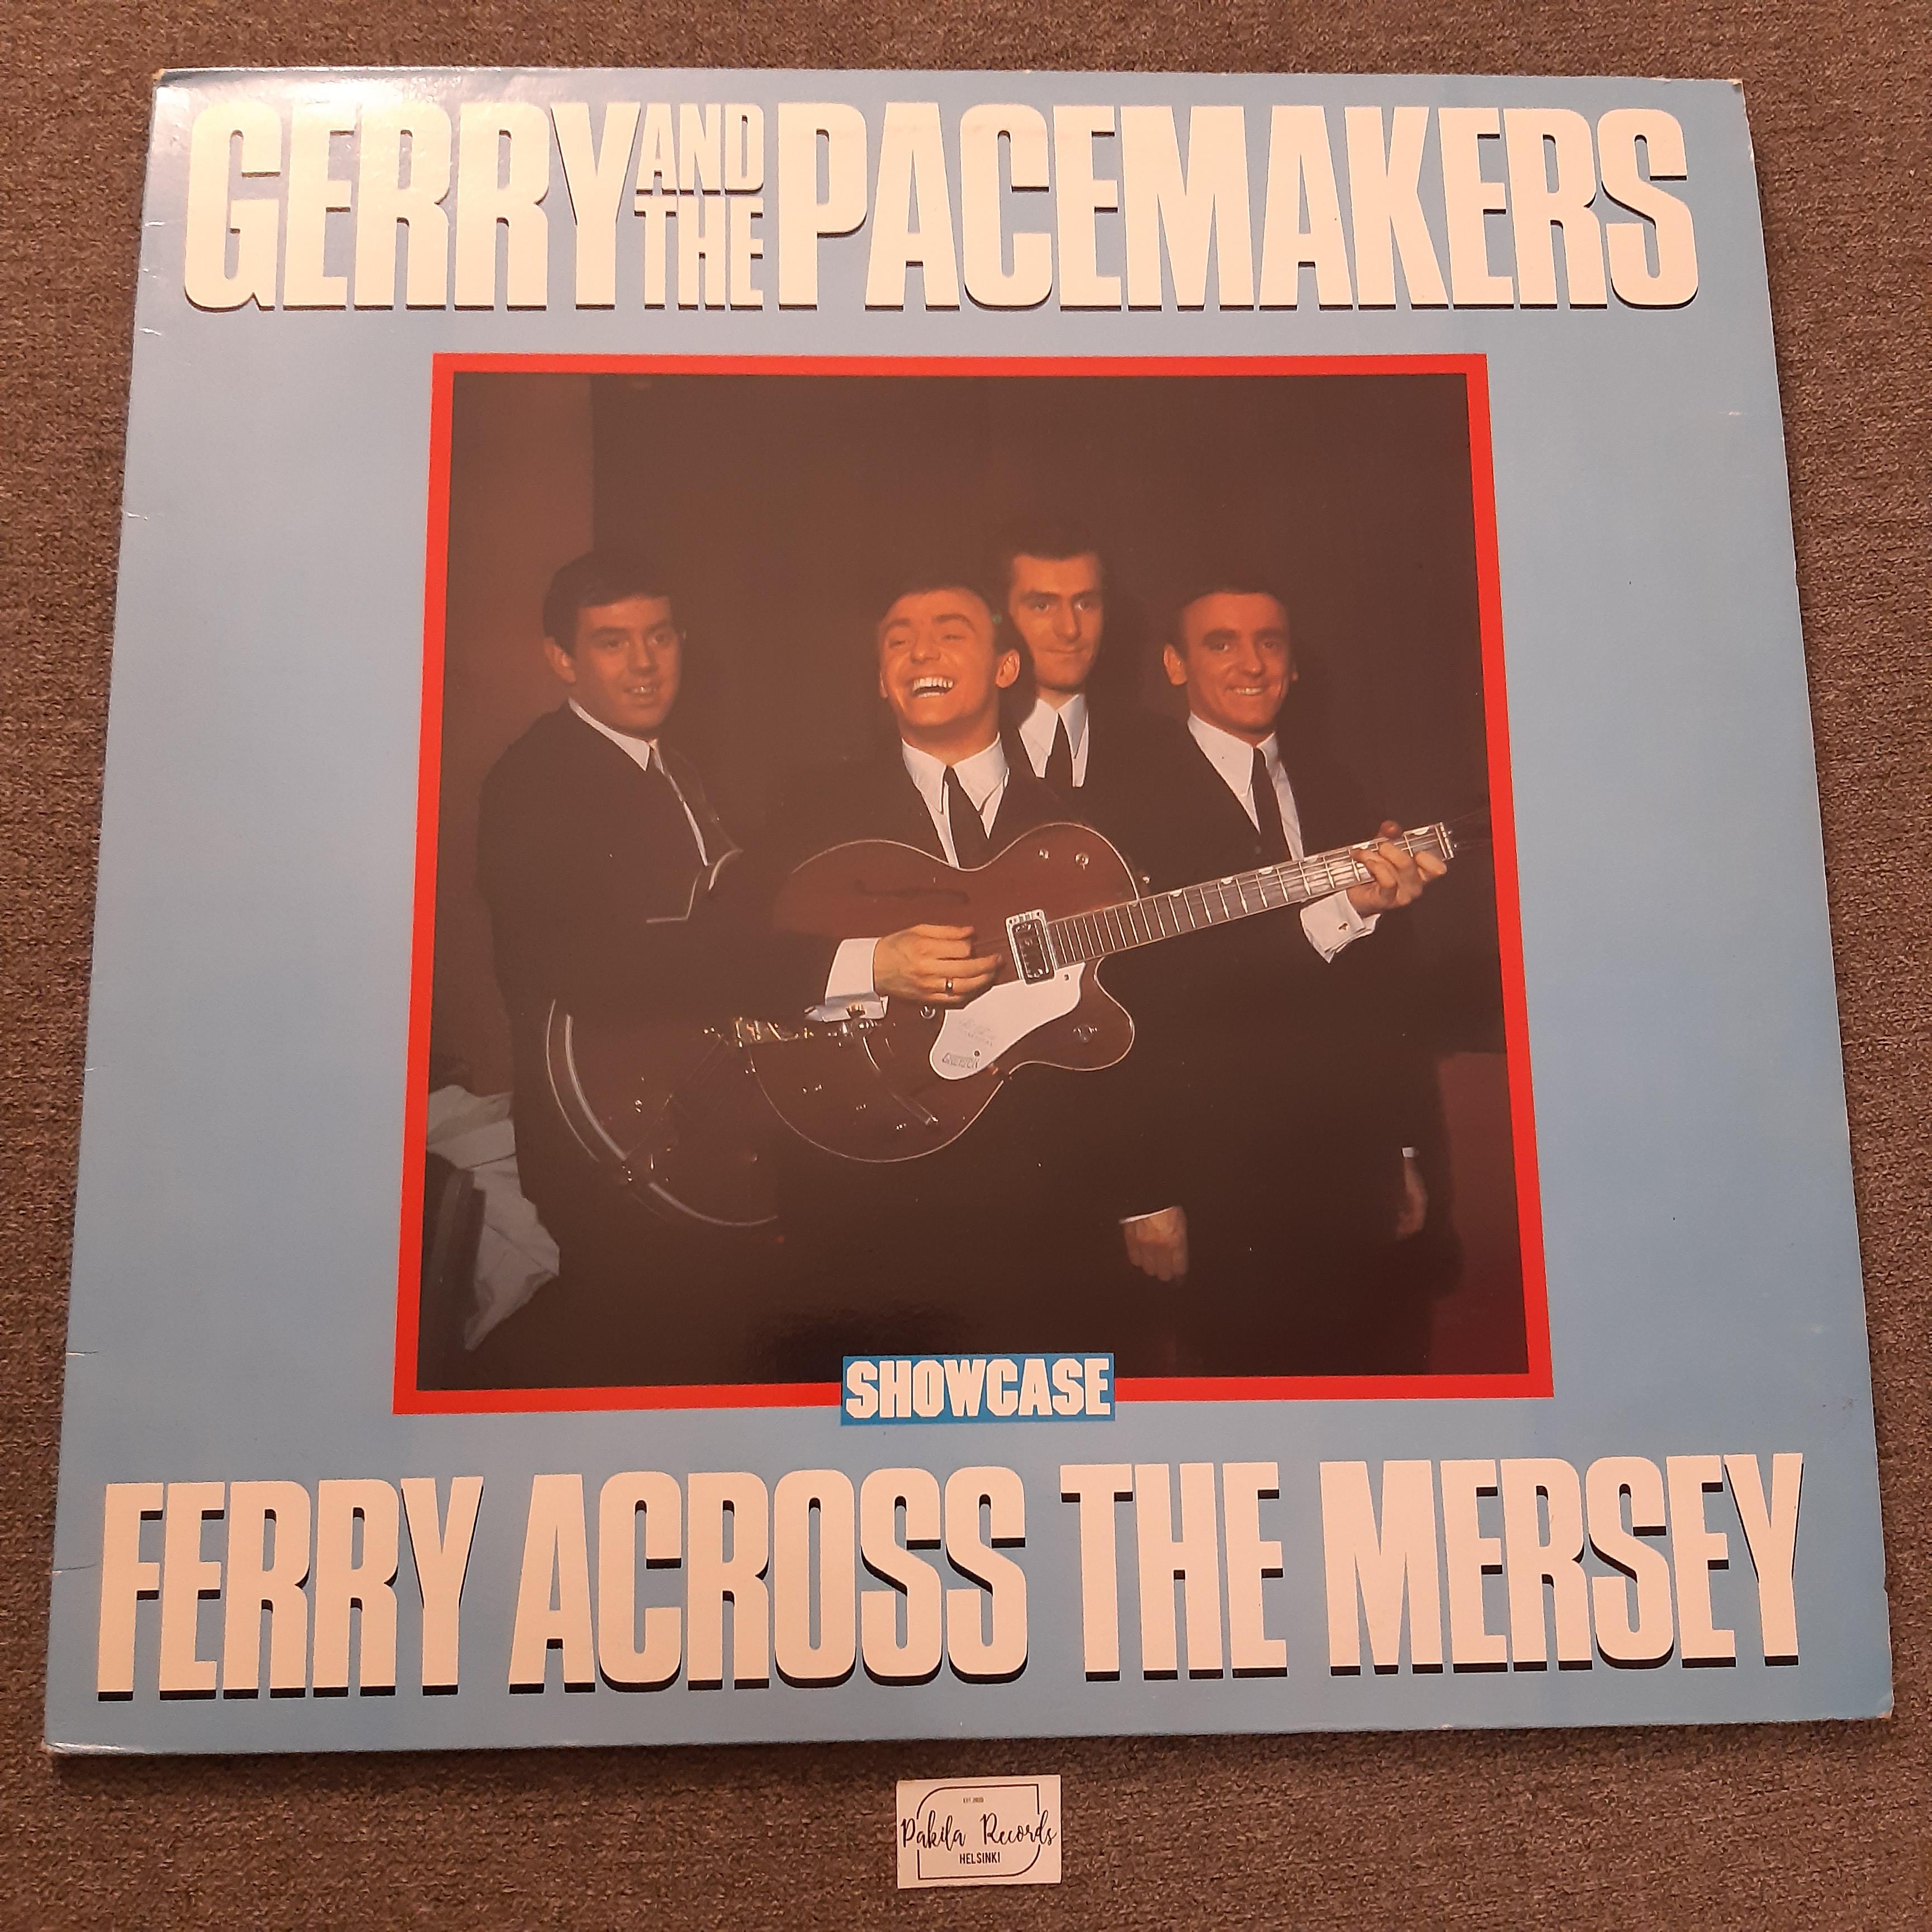 Gerry And The Pacemakers - Ferry Across The Mersey - LP (käytetty)